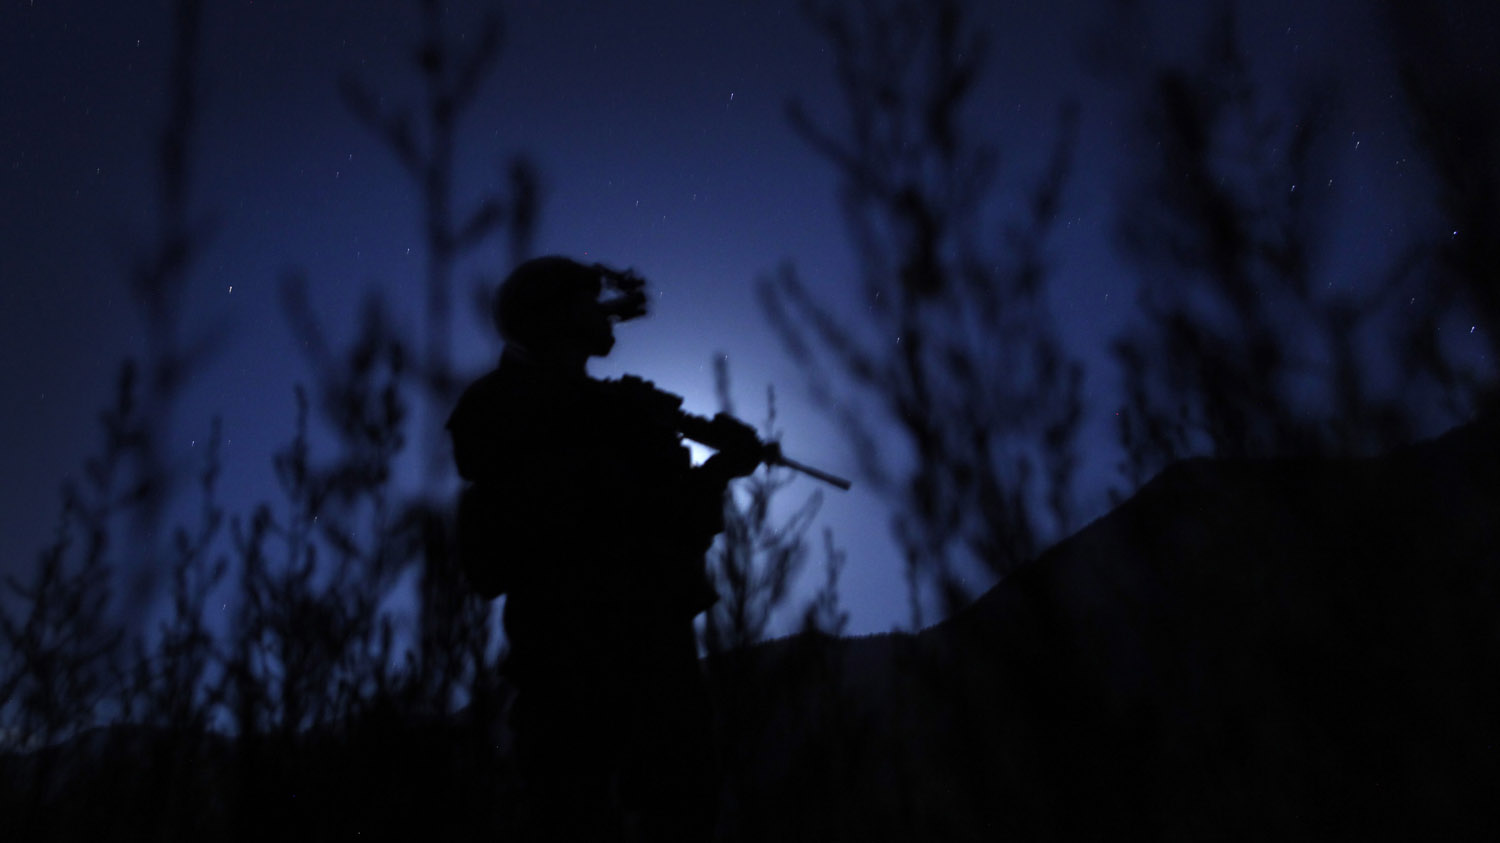 June 9, 2012. A soldier from the U.S. Army's Alpha Company, 1-12 Infantry, 4th Brigade, 4th Infantry Division, guards a landing zone at night at Combat Outpost Pirtle-King in Afghanistan's Kunar Province.